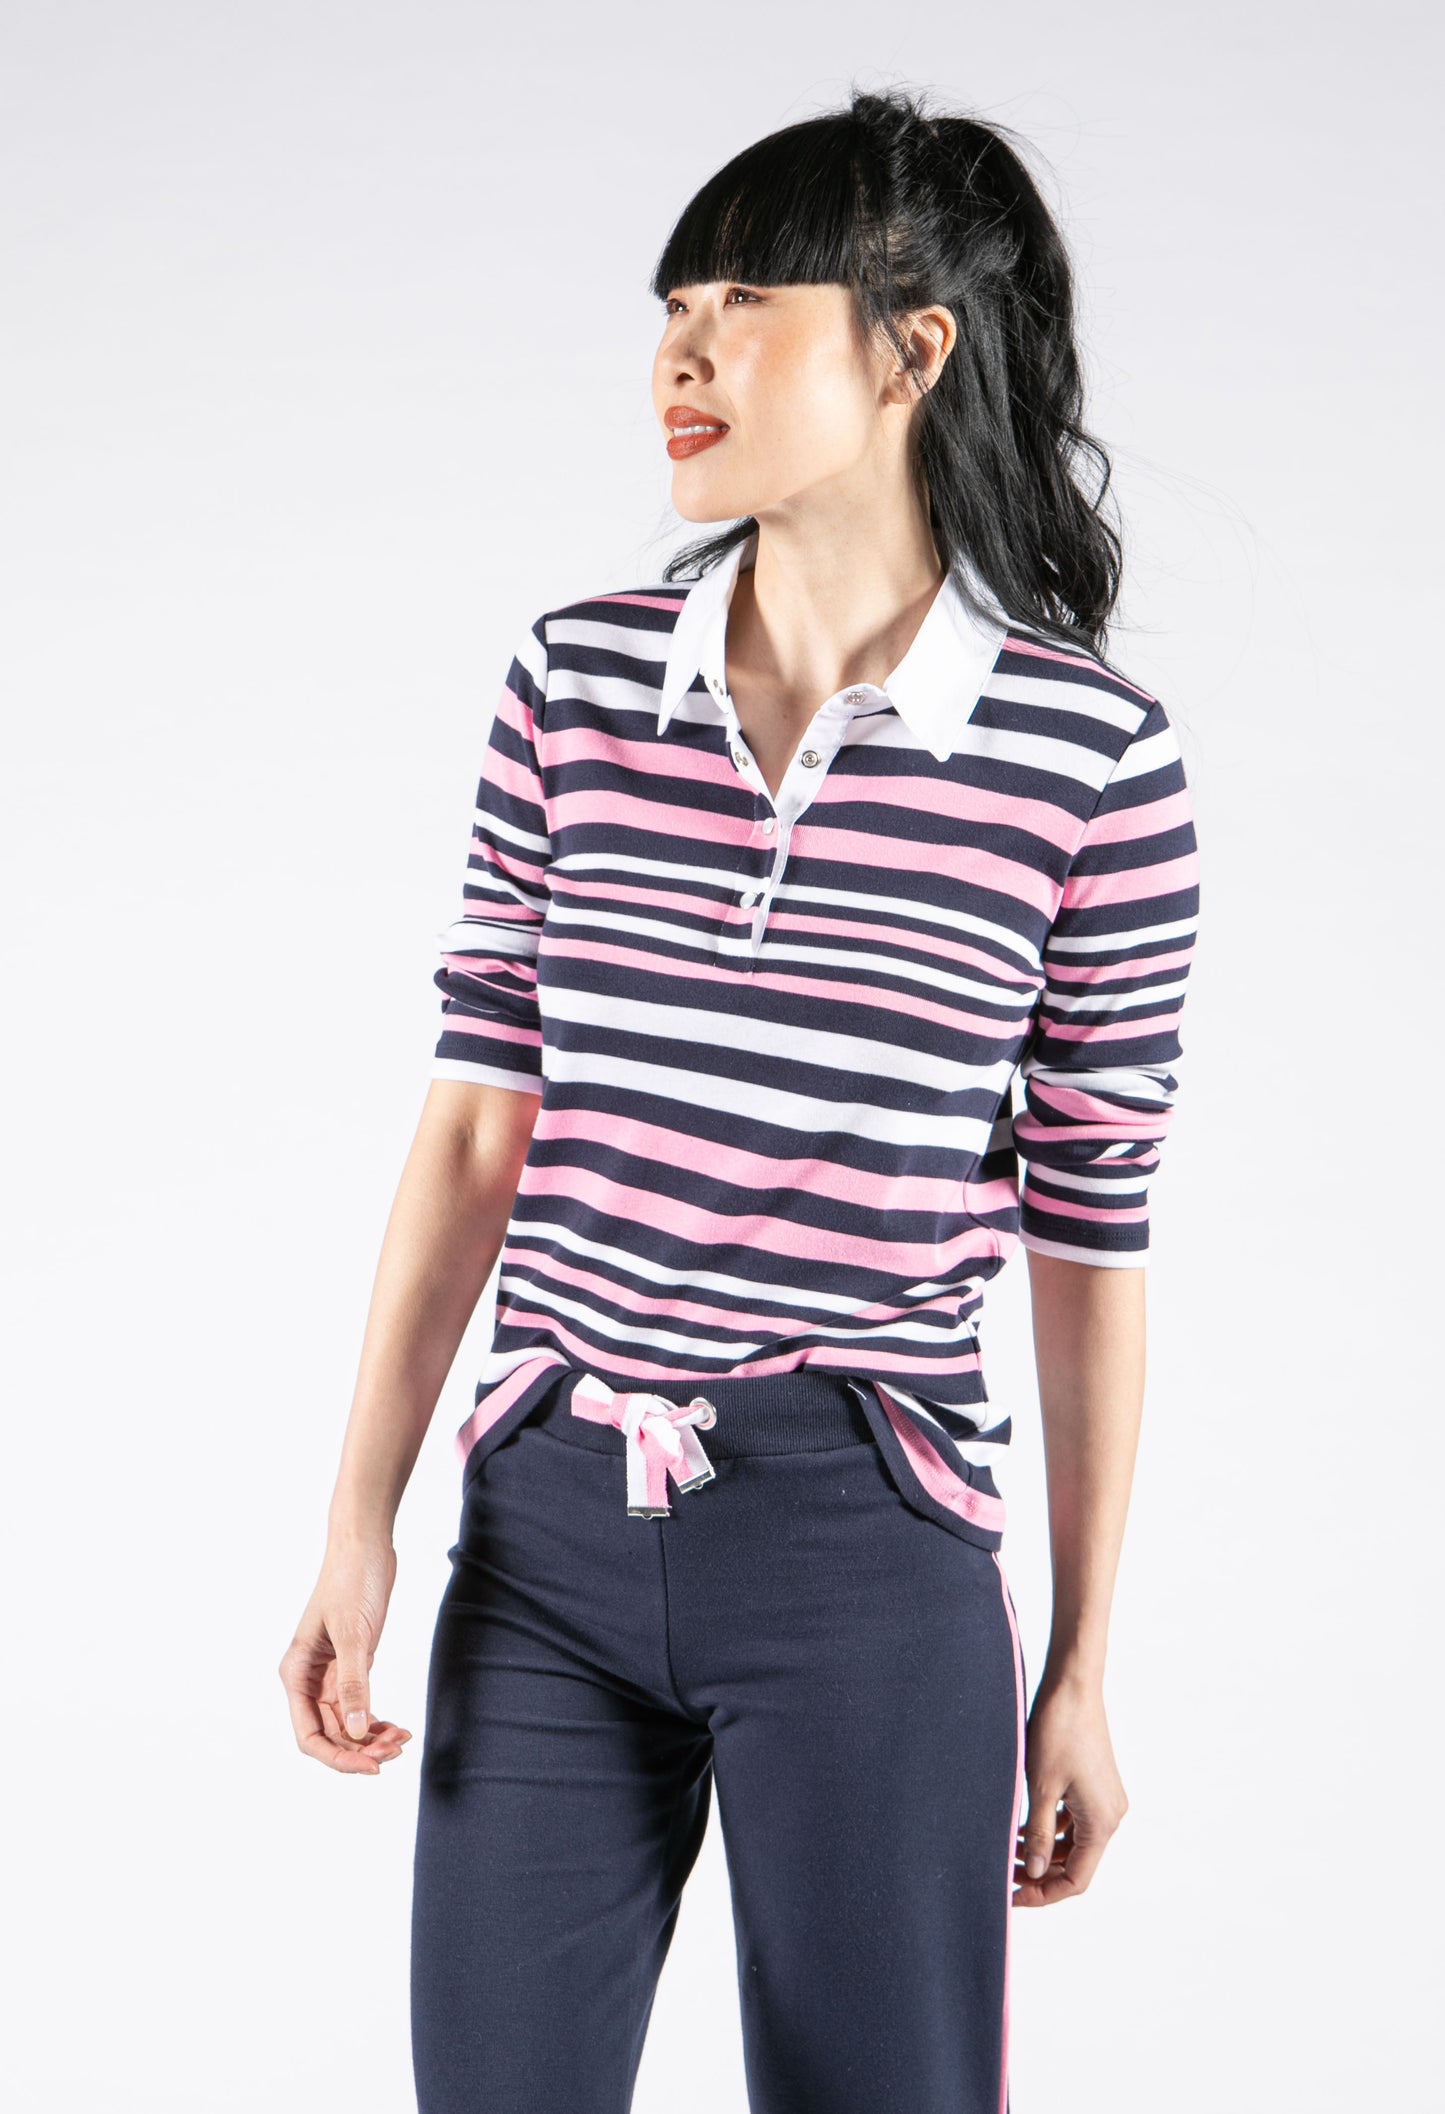 Candy and Navy Striped Polo Top